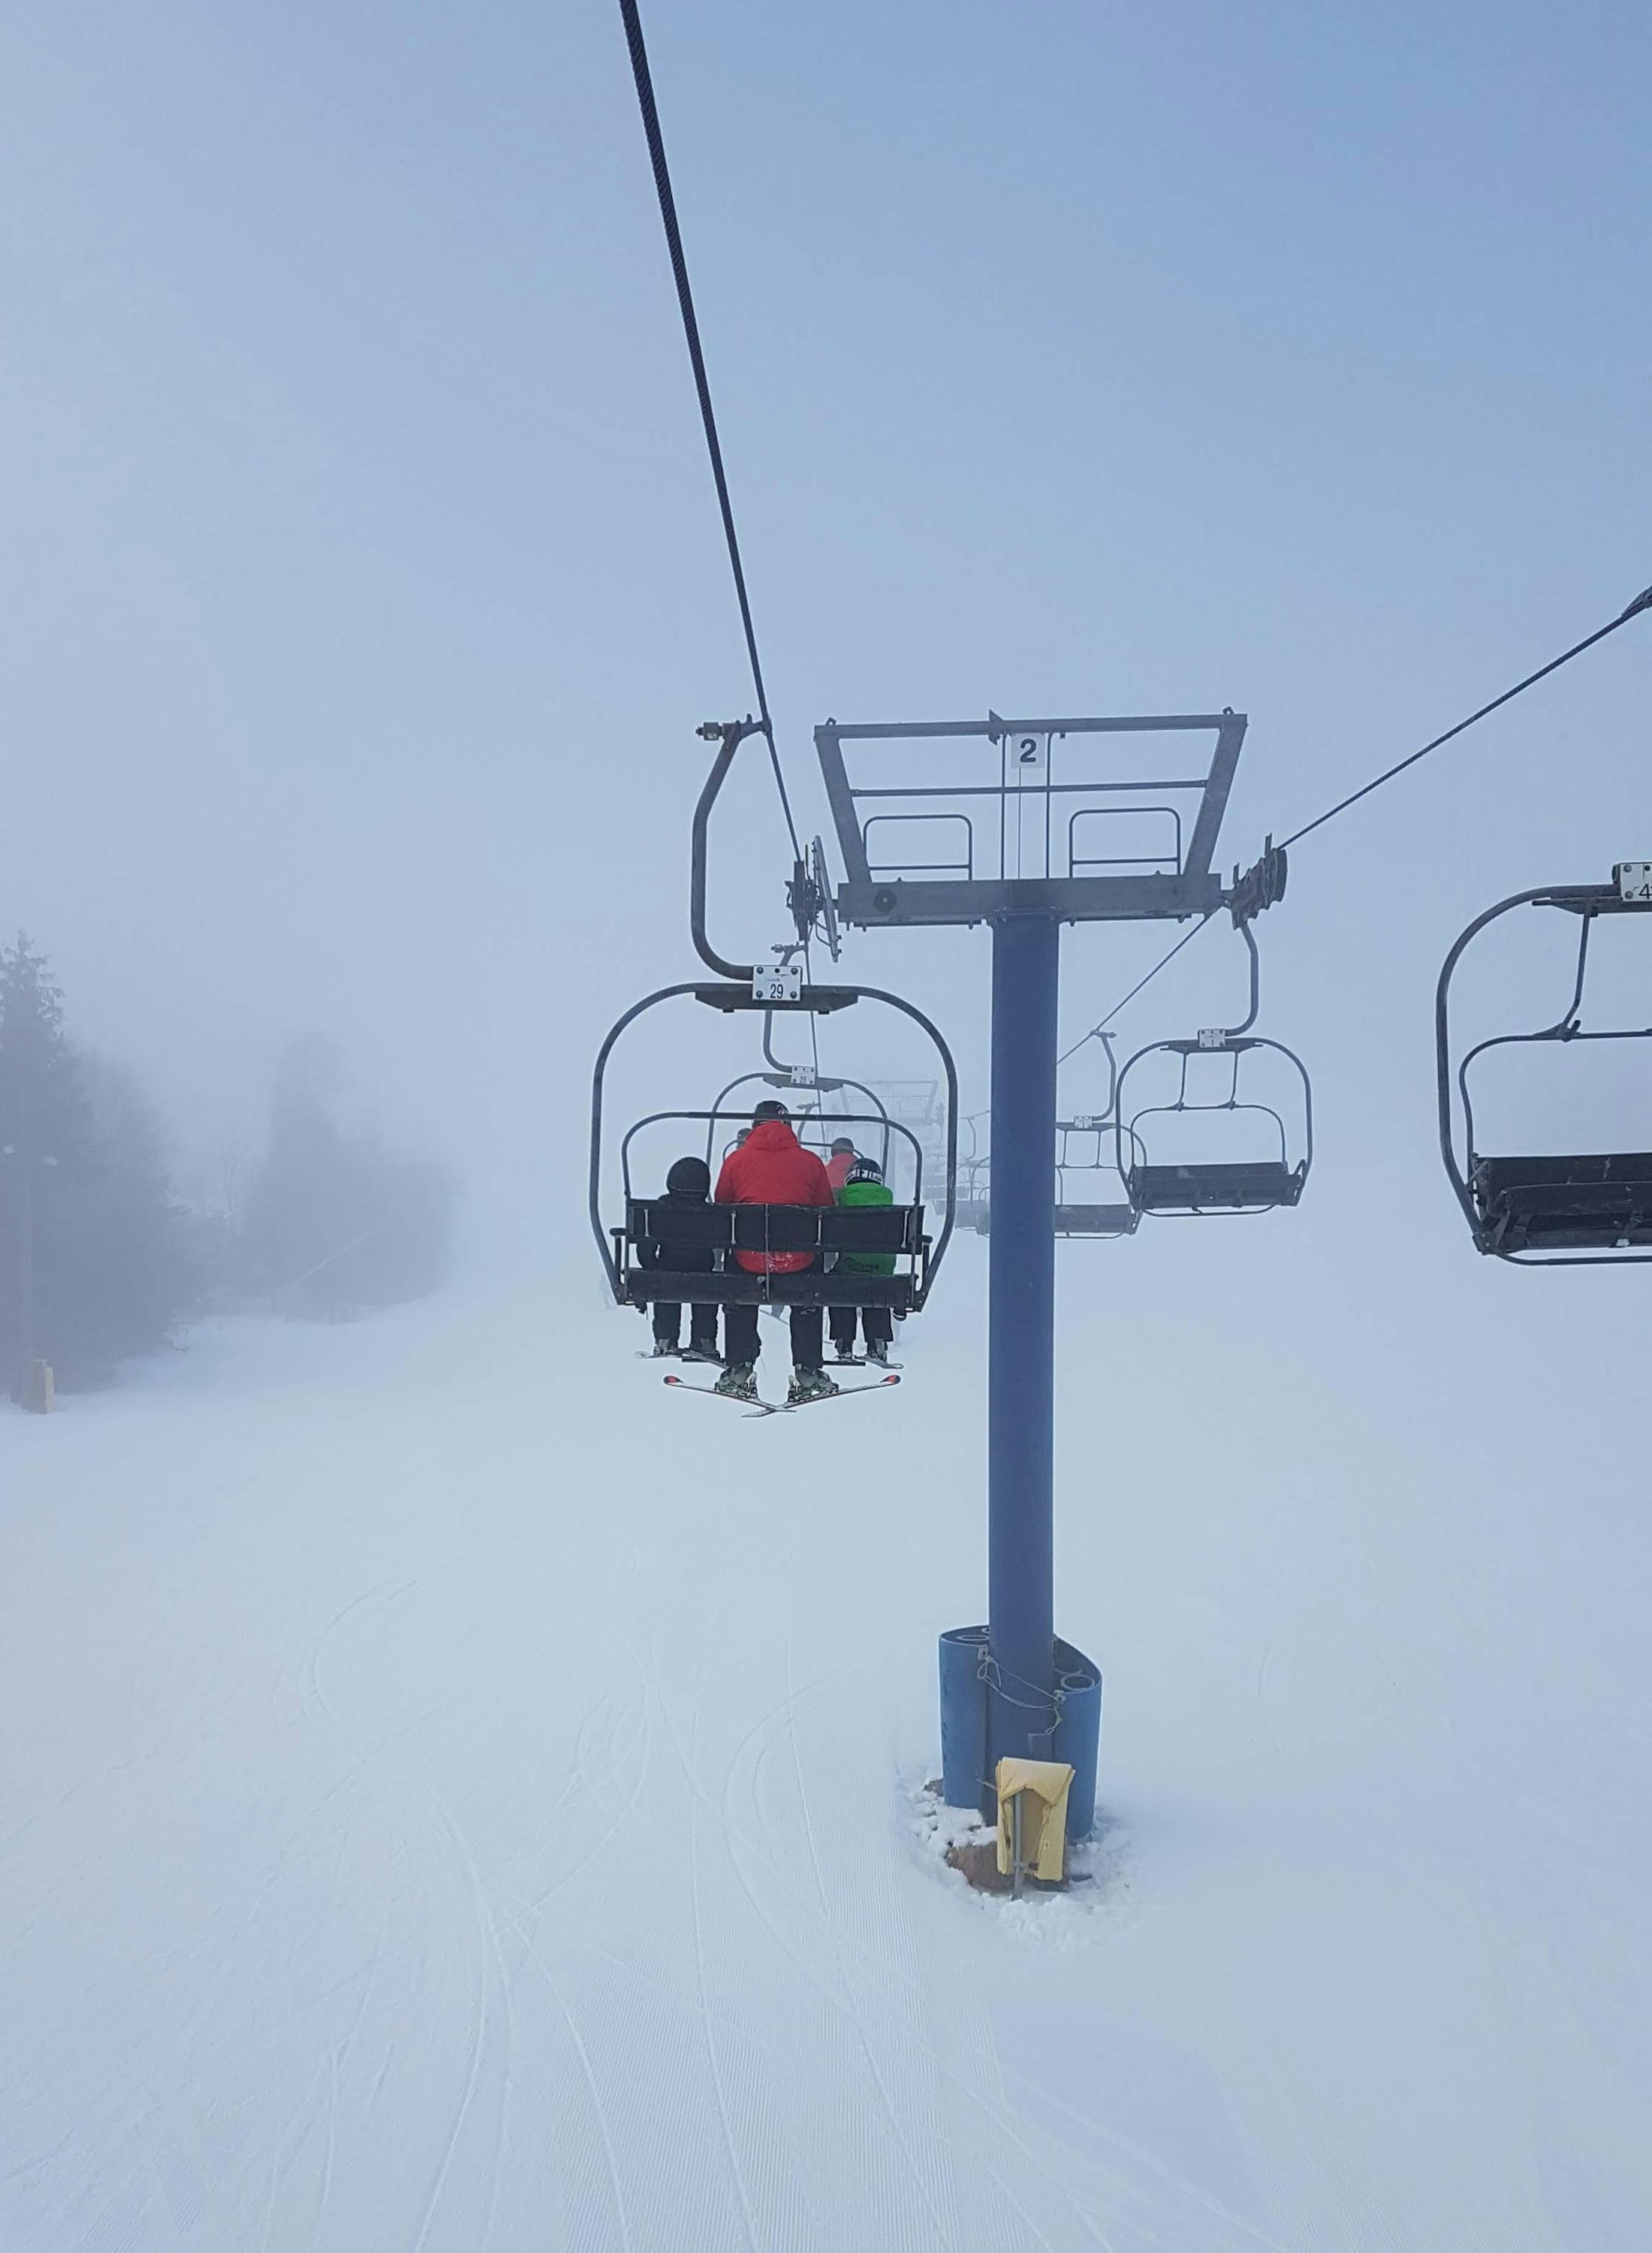 A foggy photo of 3 people on a chairlift, taken from behind. 